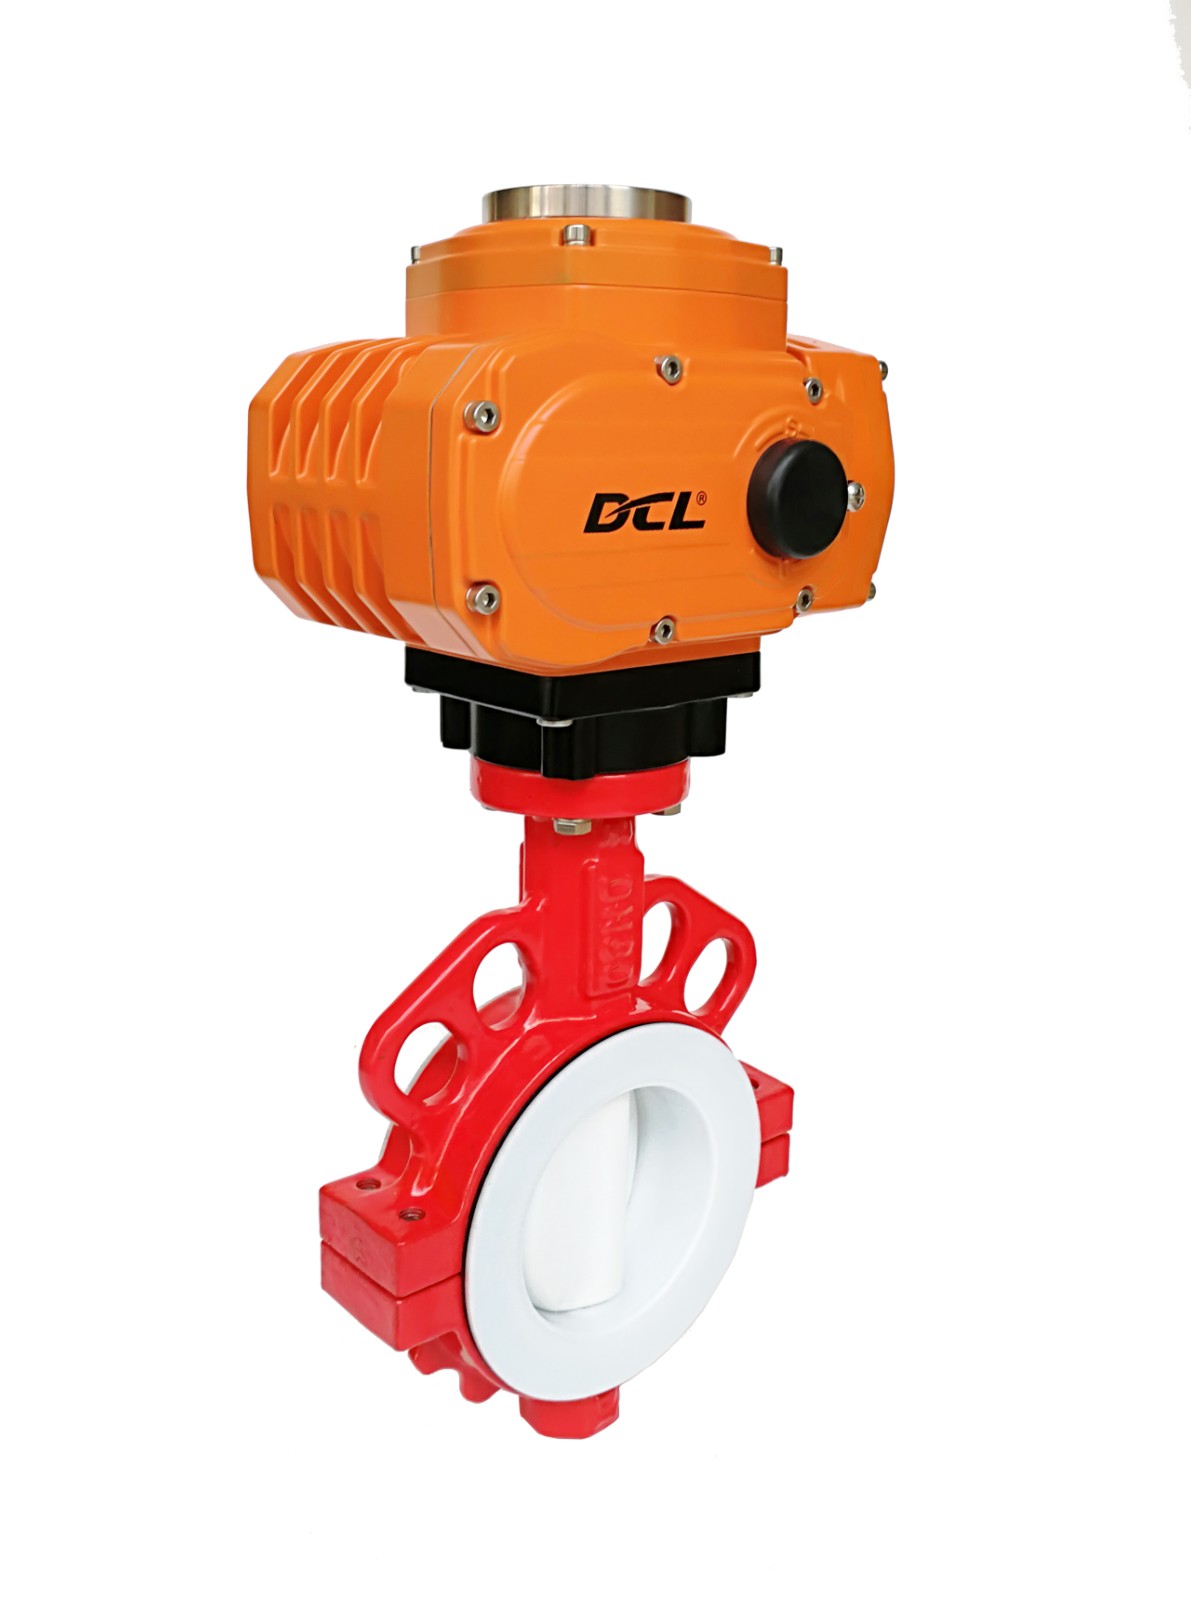 DCL explosion proof electric actuator